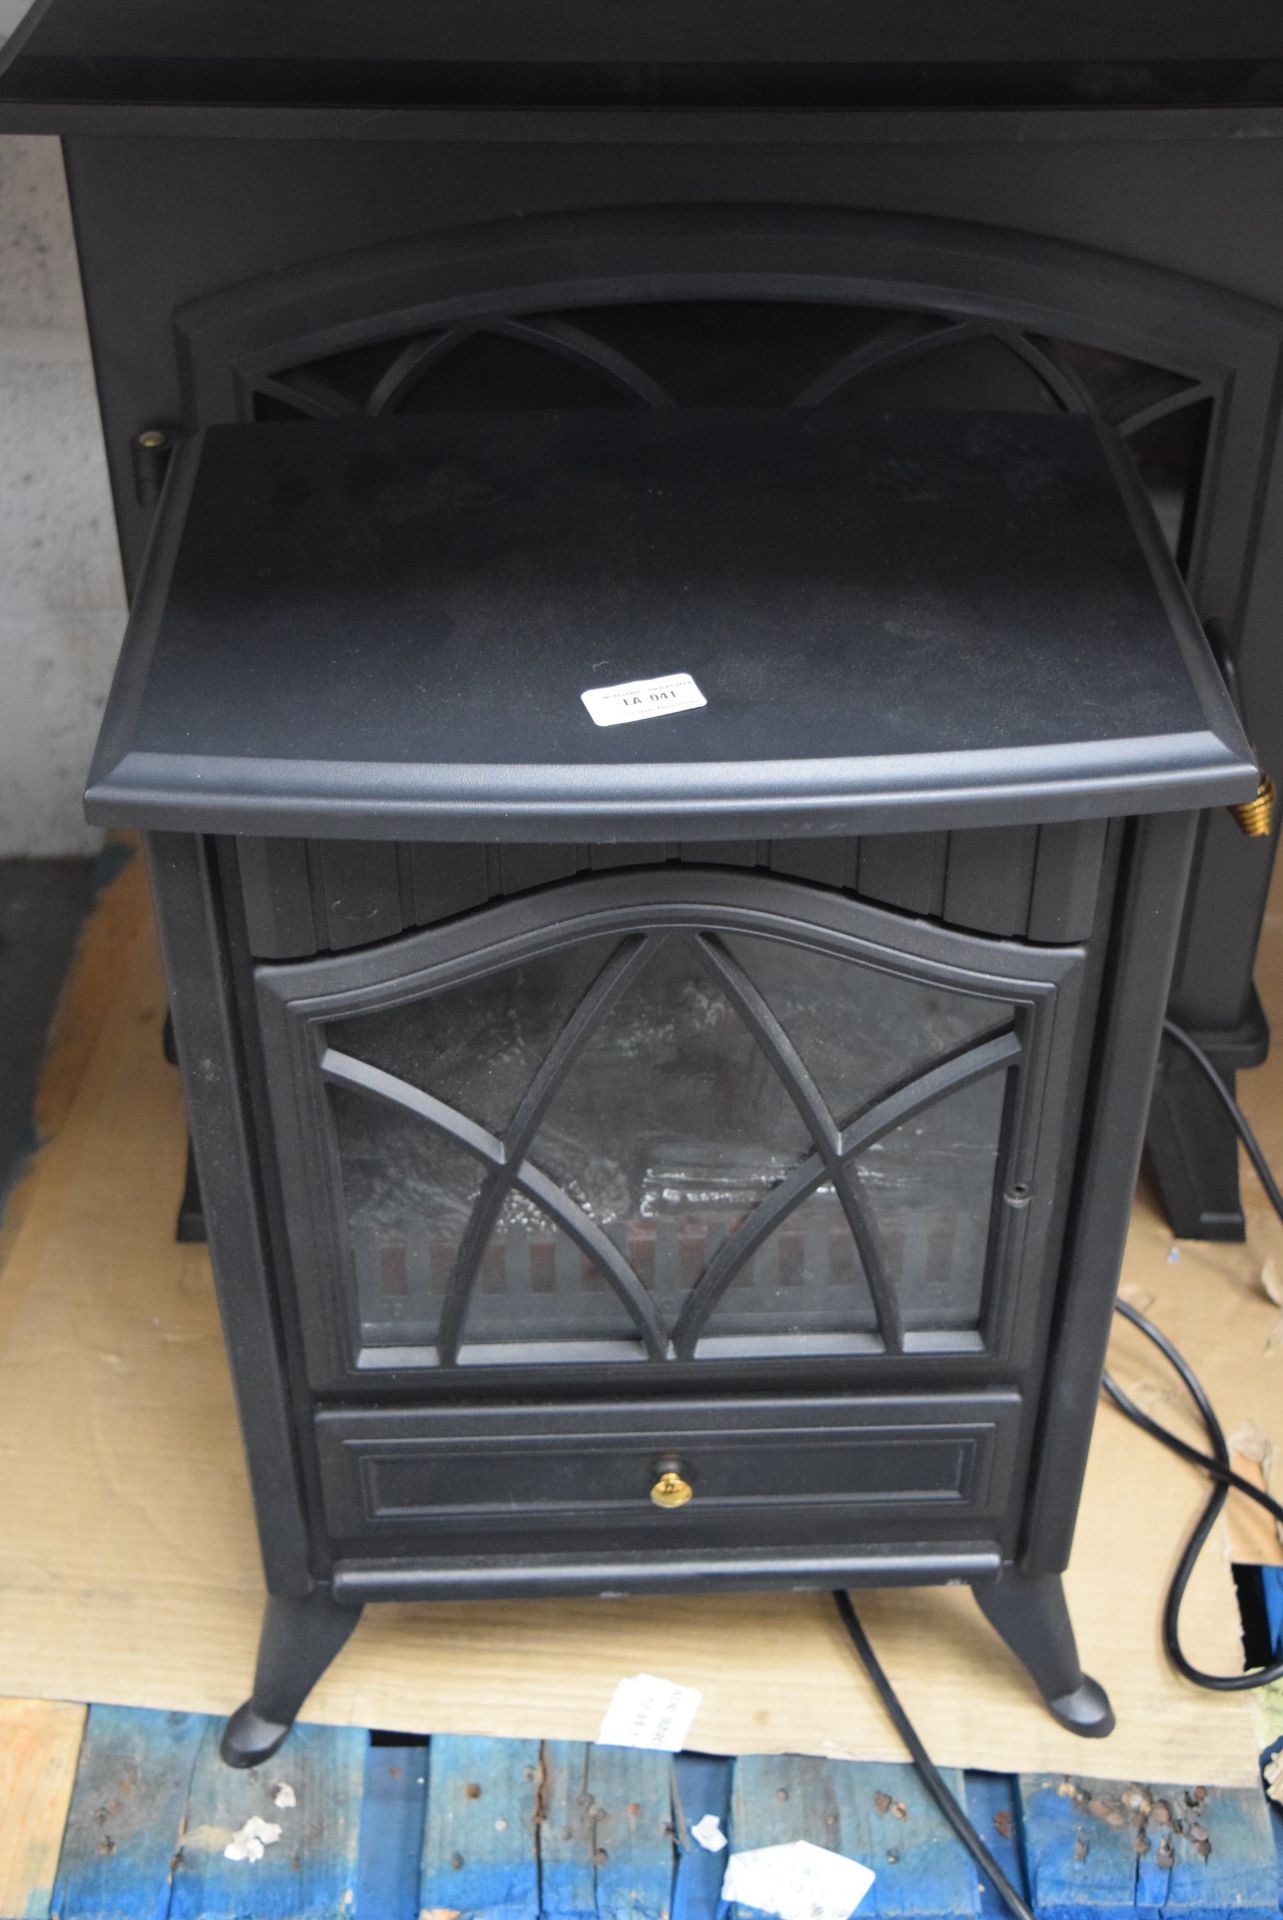 2 X TRADITIONAL ELECTRIC FIRE PLACES COMBINED RRP £140 11.05.18